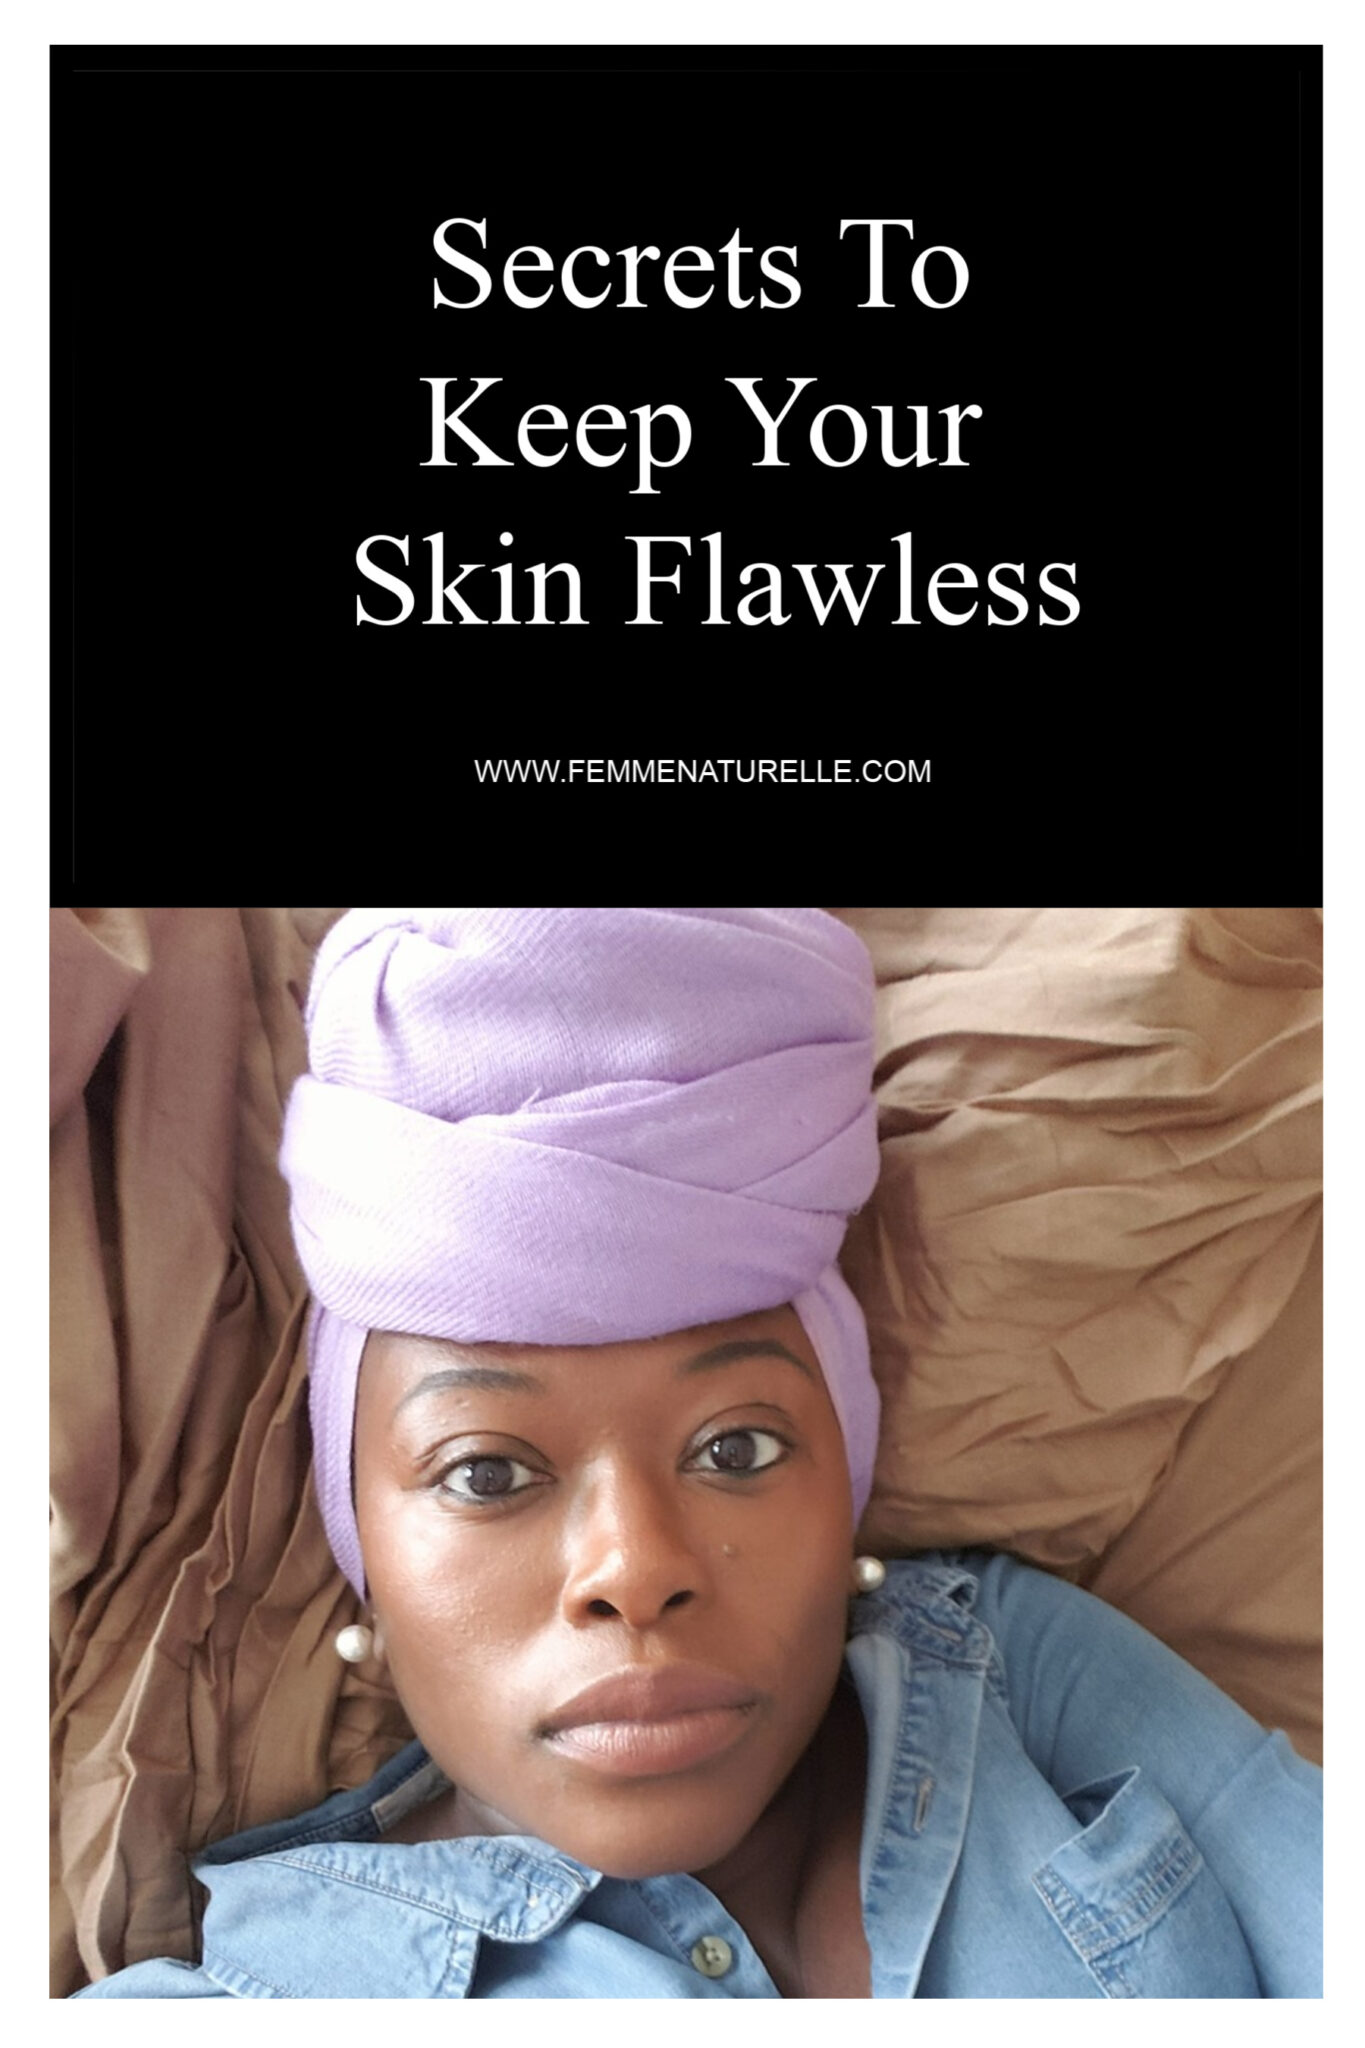 Secrets To Keep Your Skin Flawless